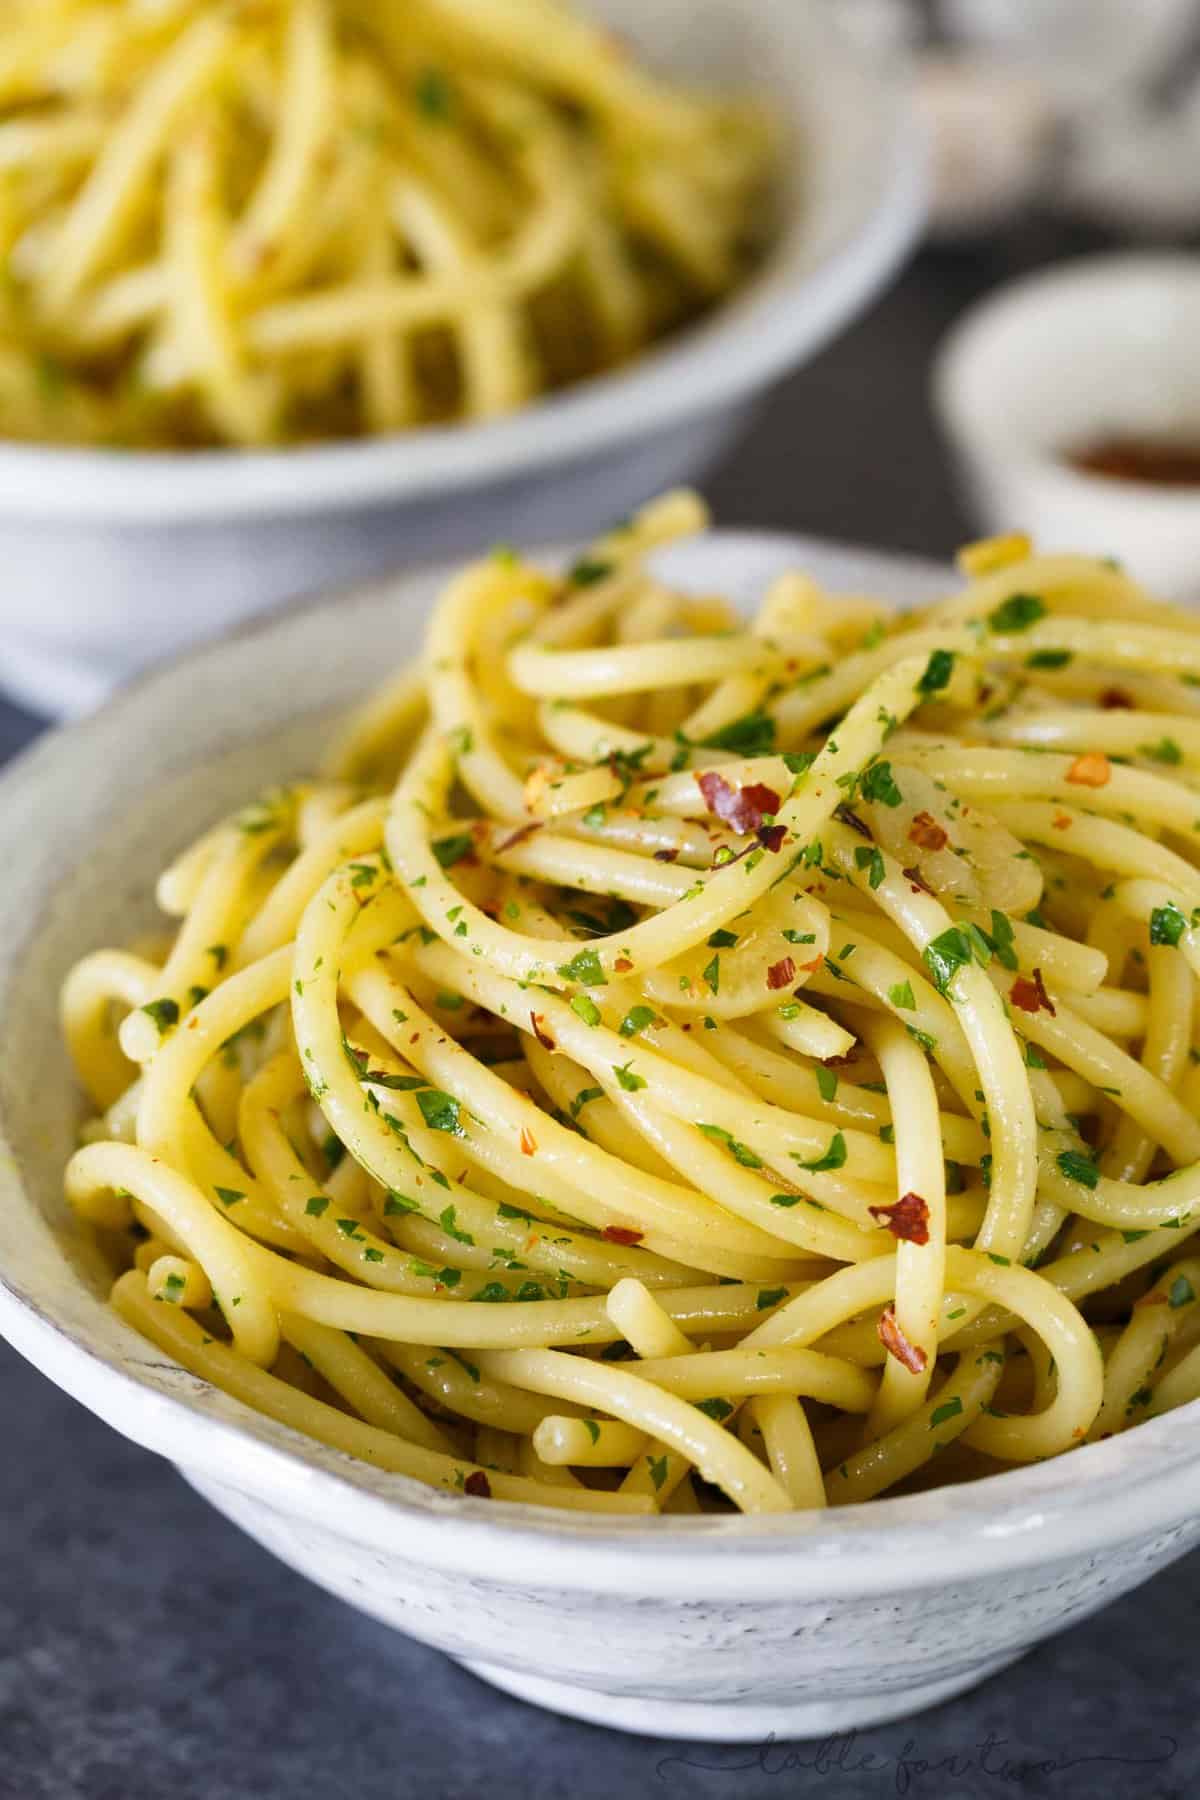 Pasta aglio e olio is a classic Italian pasta dish that has the simplest ingredients but full of big flavor. Incredibly easy to throw together any night of the week when you're craving some light pasta!